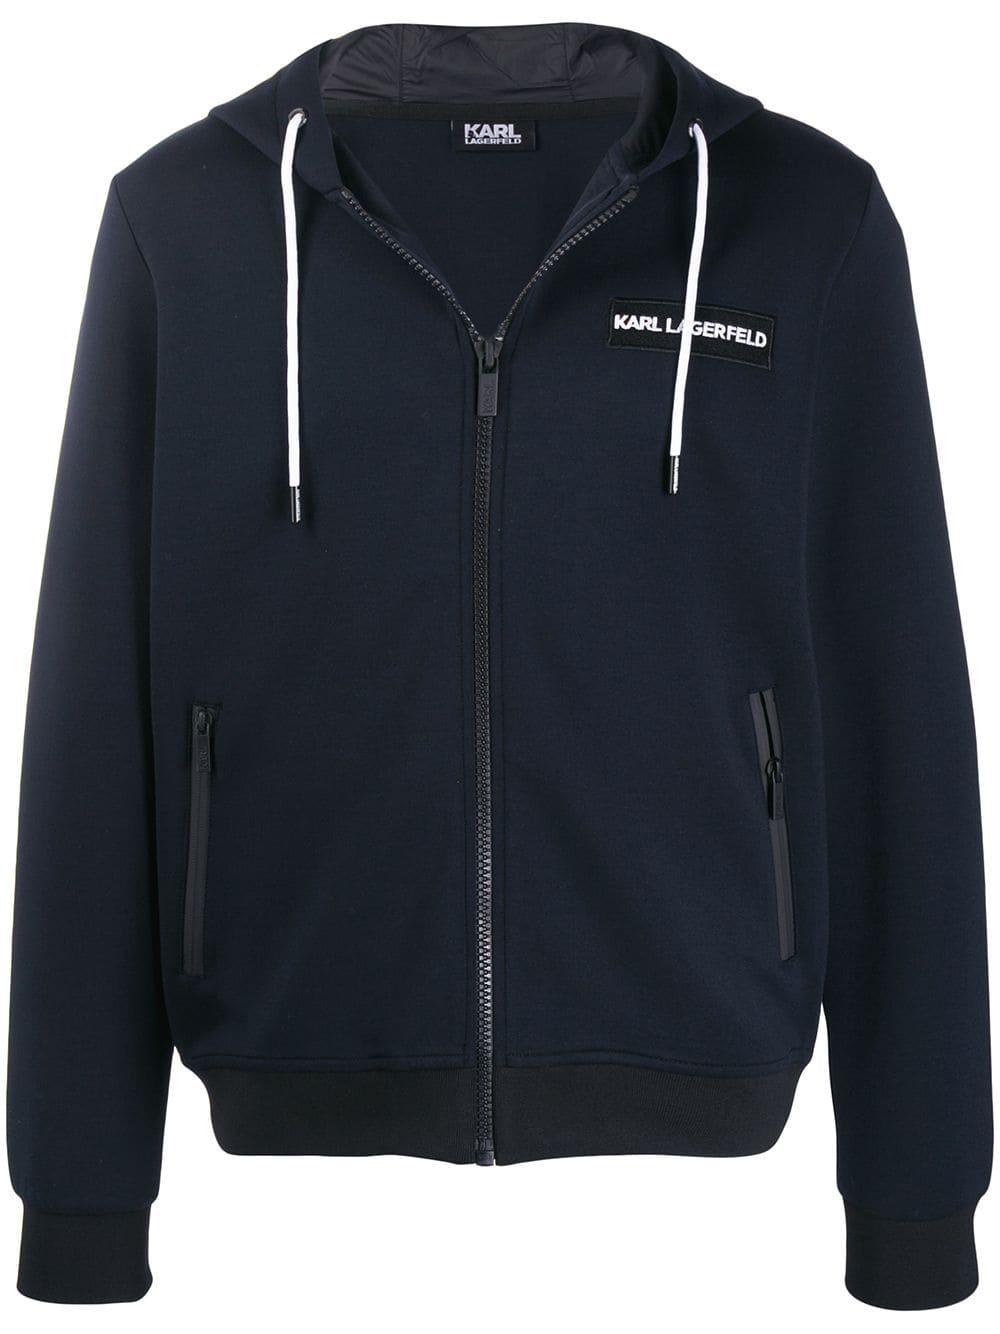 Karl Lagerfeld Synthetic Zipped Hoodie in Blue for Men - Lyst